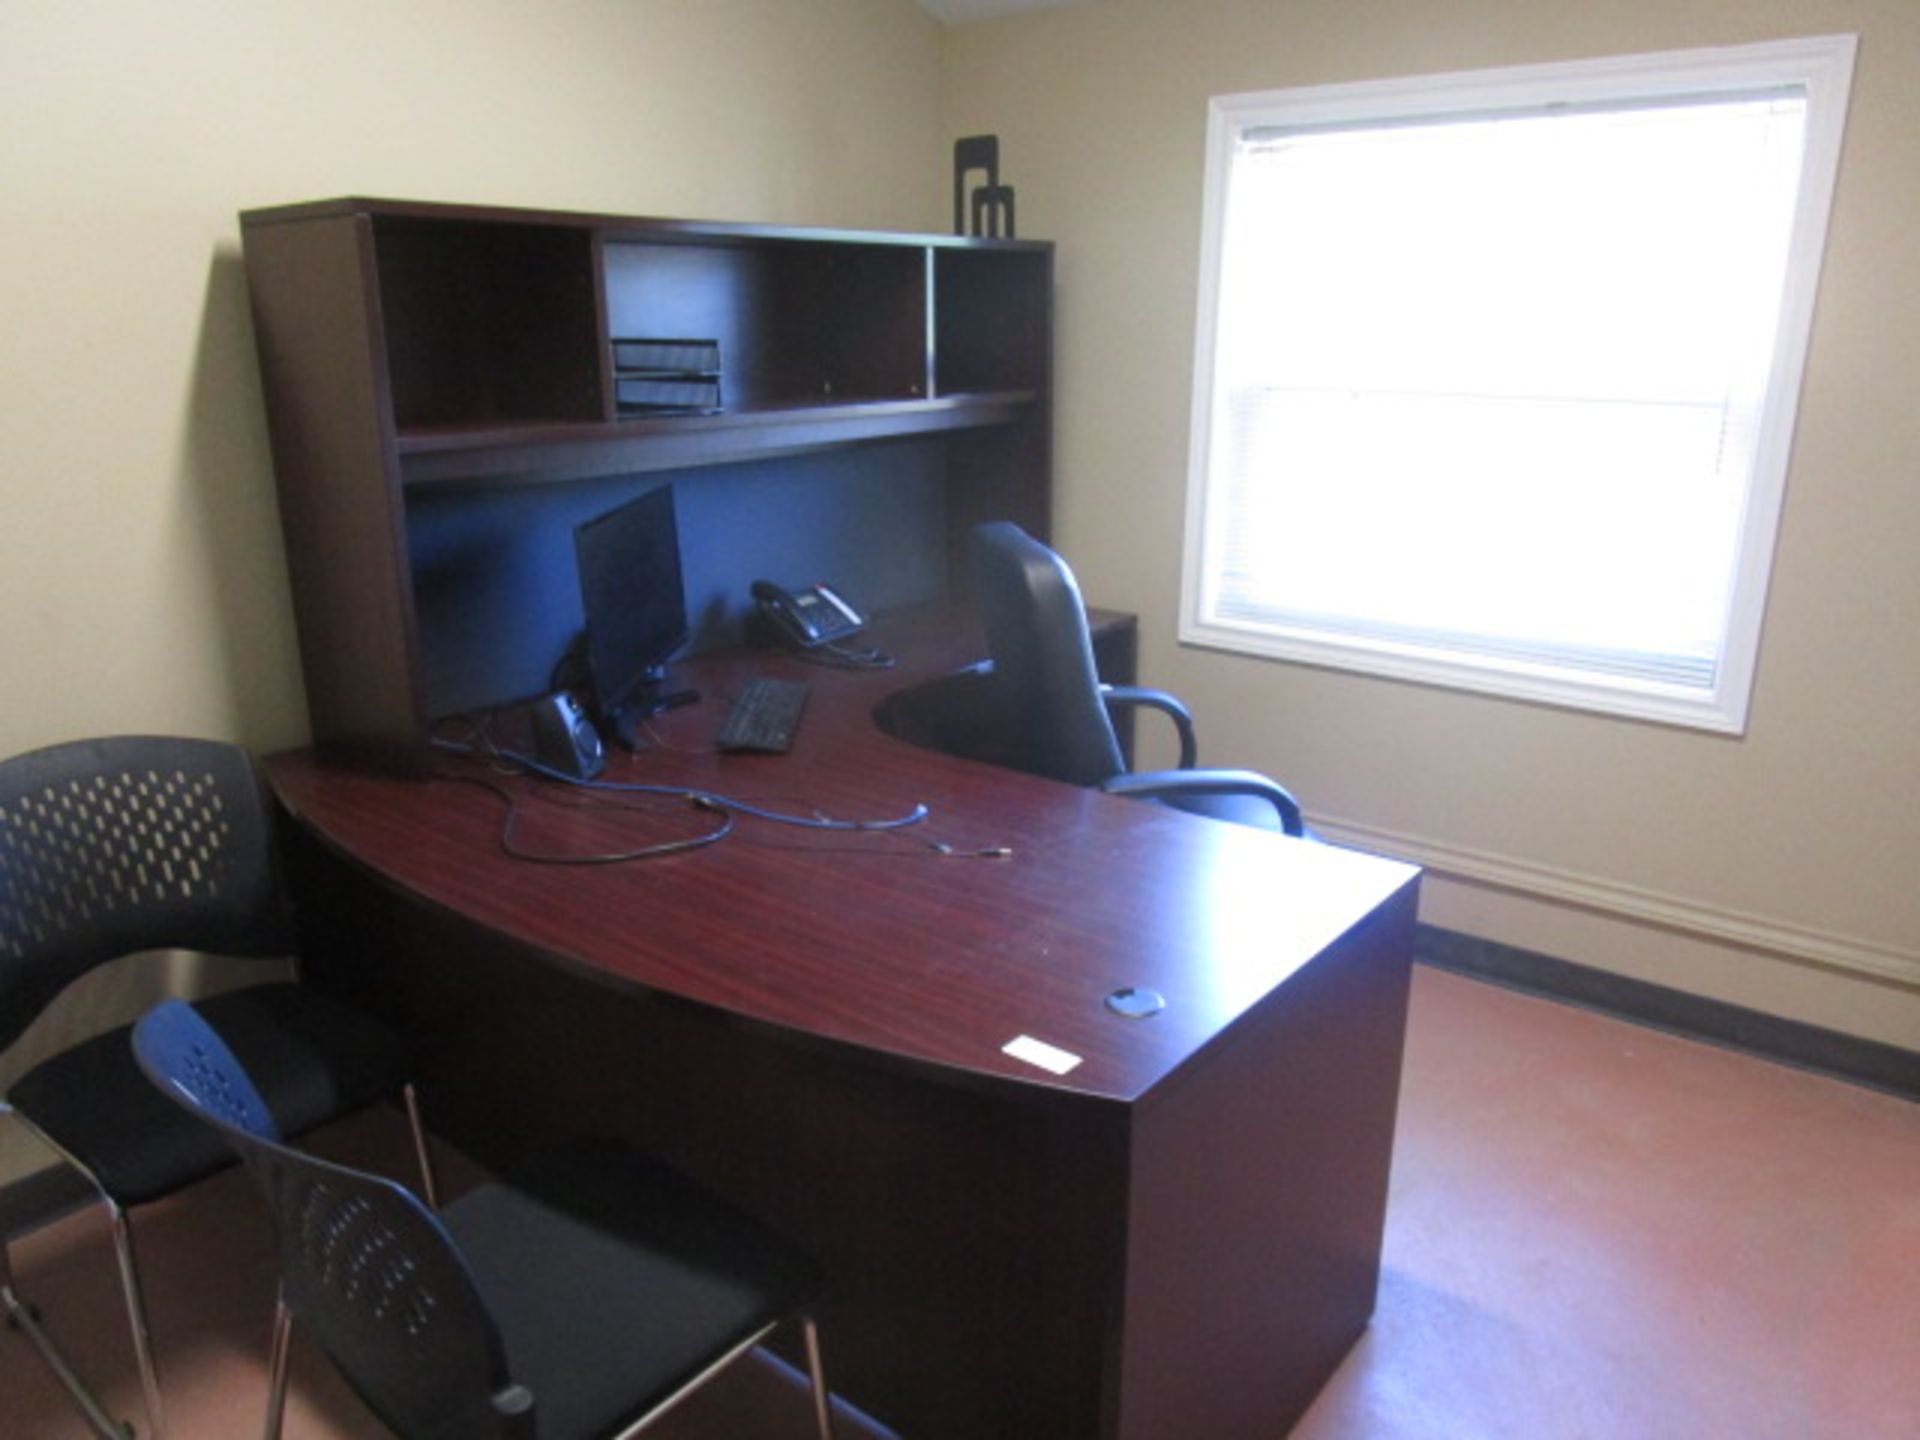 Complete Office Contents - includes Desk with Overshelf, 3 Chairs, 4 Door lateral filing cabinets,